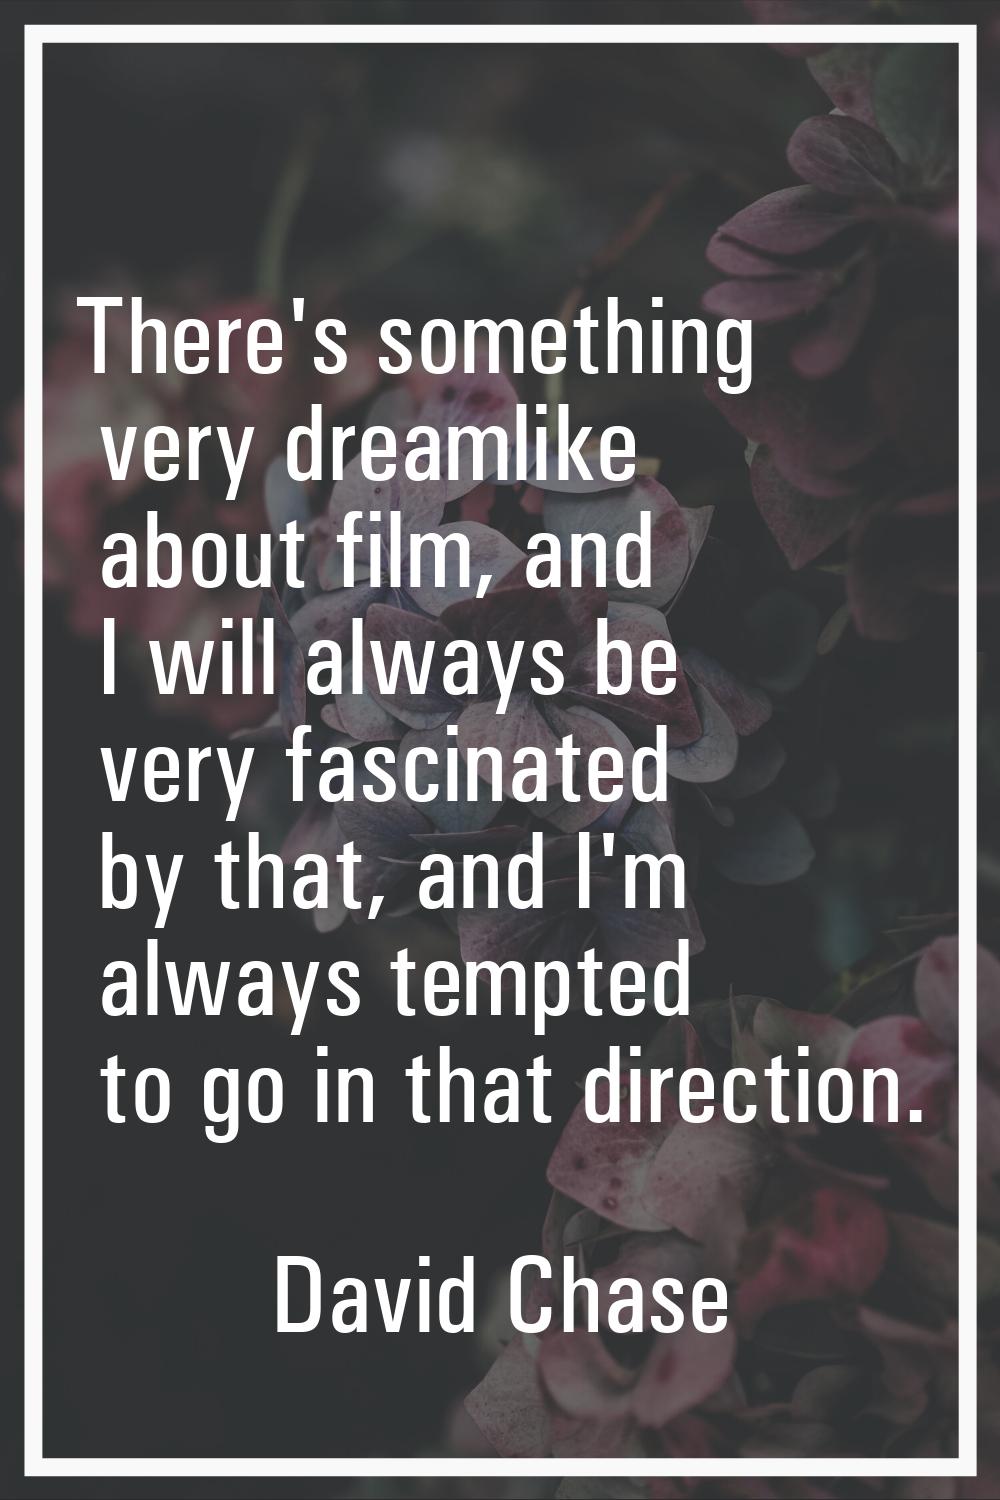 There's something very dreamlike about film, and I will always be very fascinated by that, and I'm 